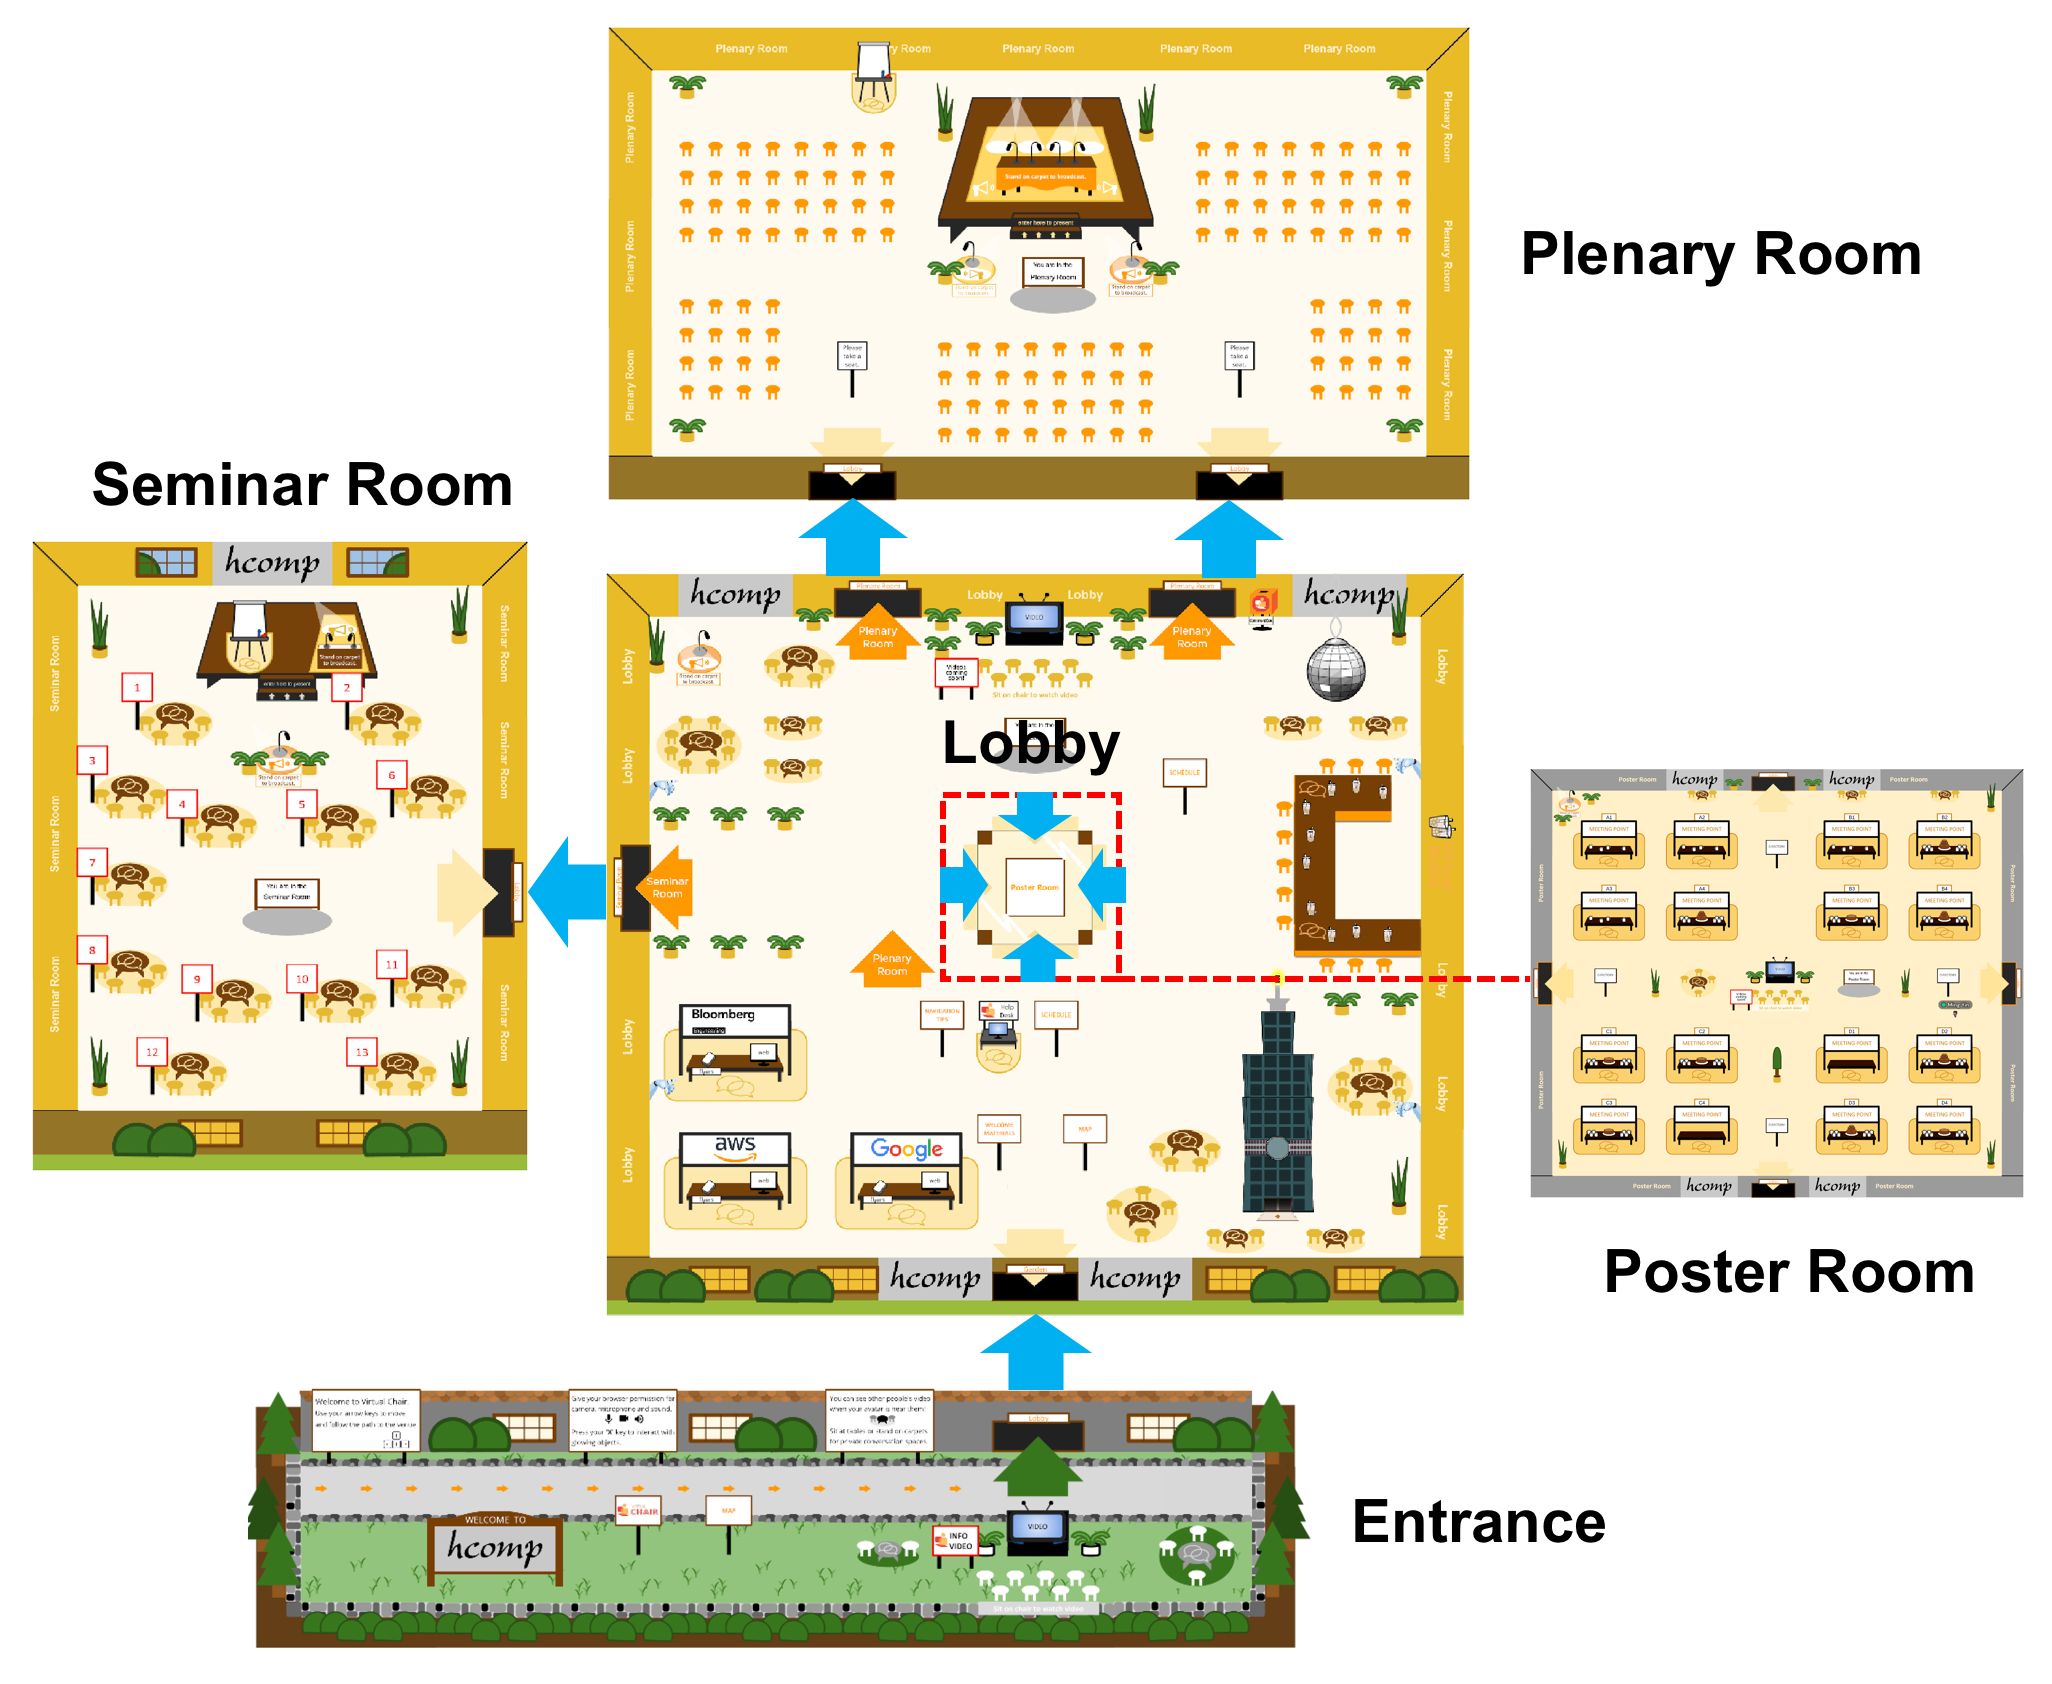 A map of the Virtual Chair venue. Entrance leads to the lobby, which can go north for the plenary room, east for the poster room, or west for the seminar room.